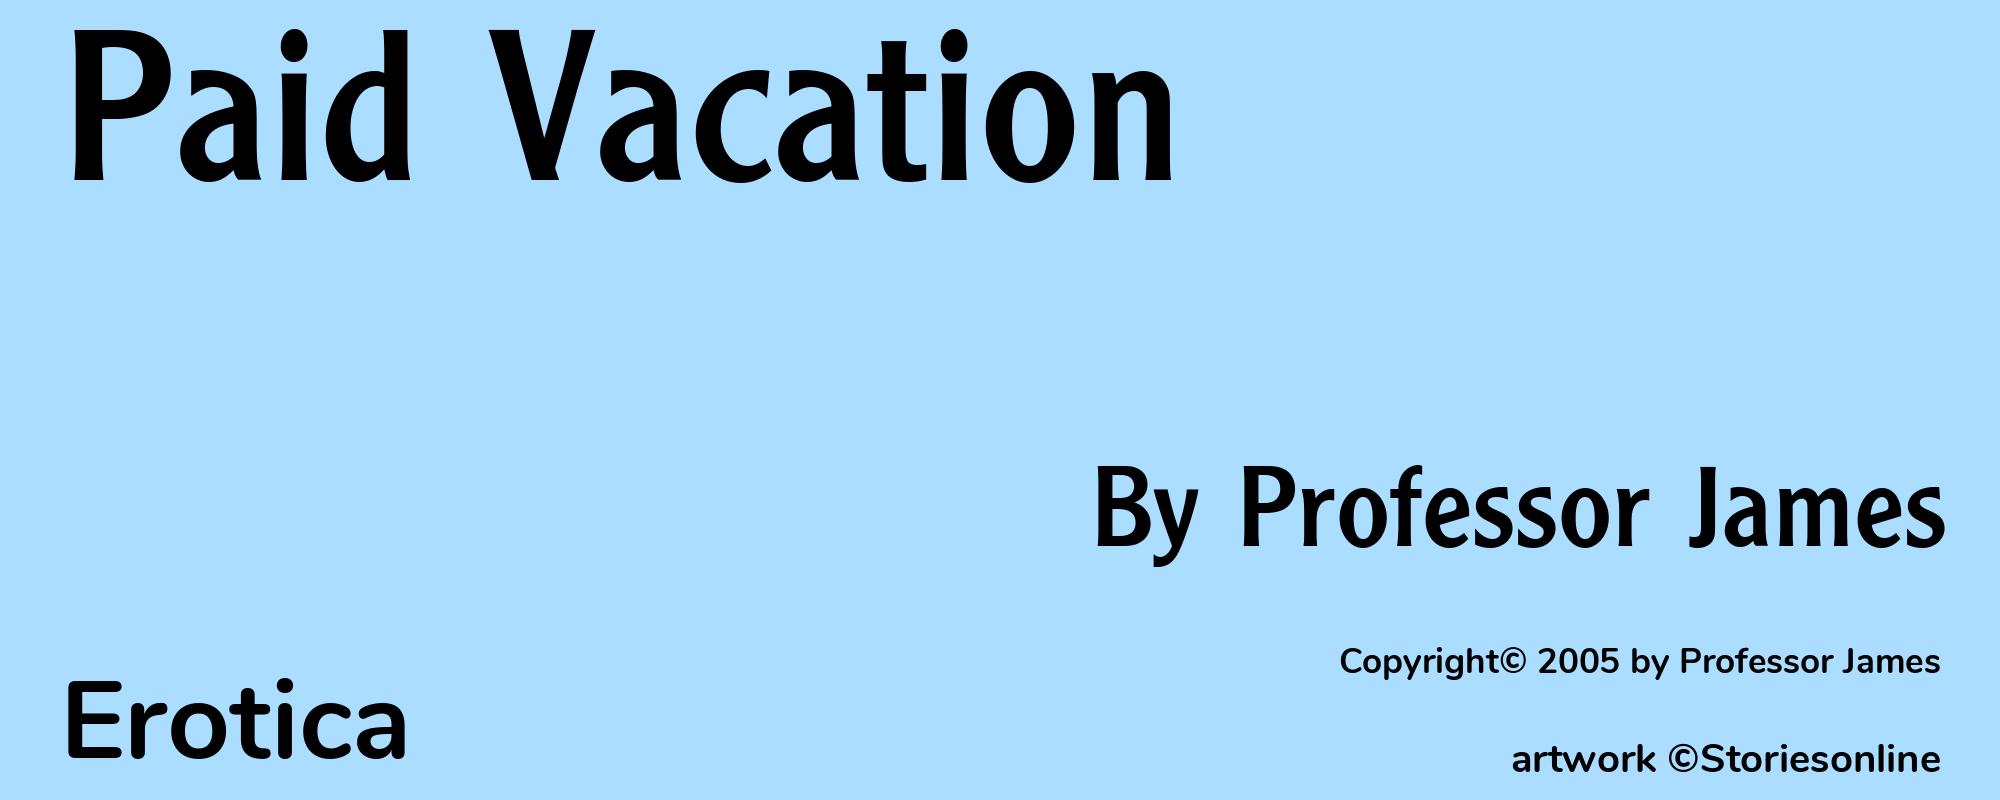 Paid Vacation - Cover